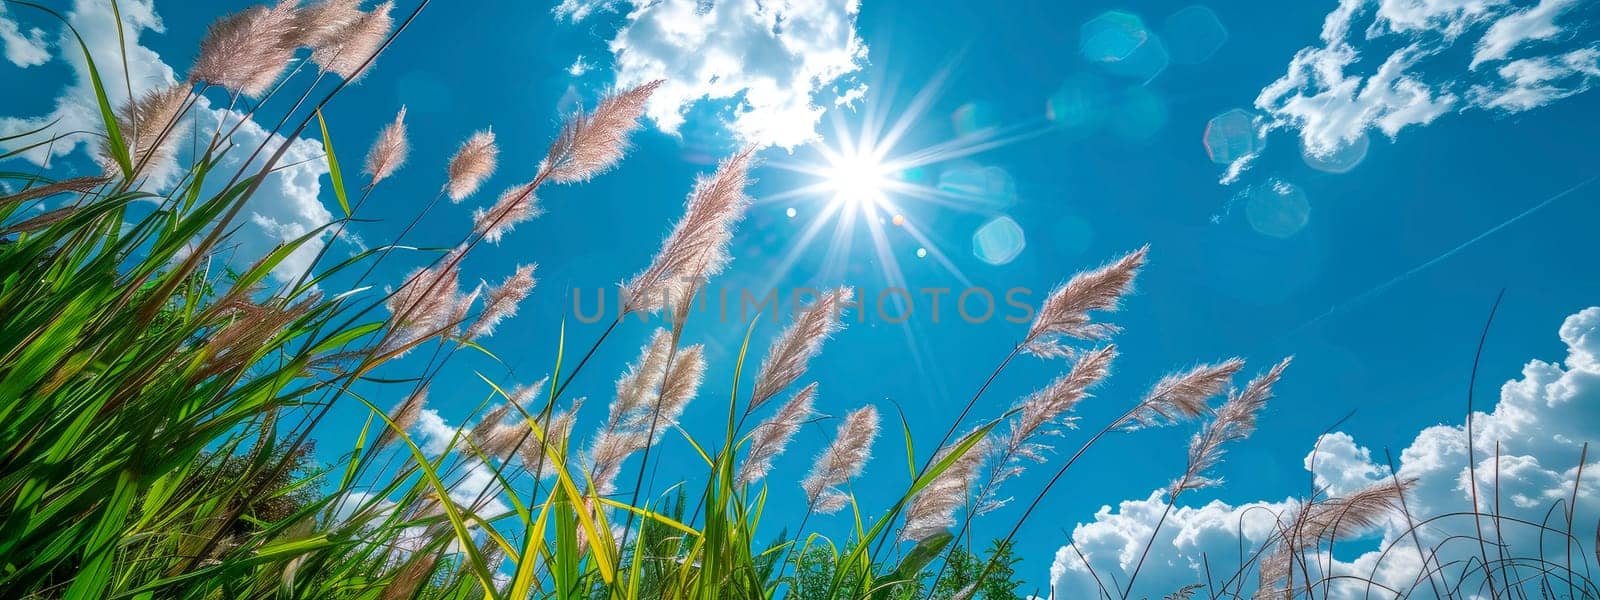 grass against the sky. selective focus. nature.